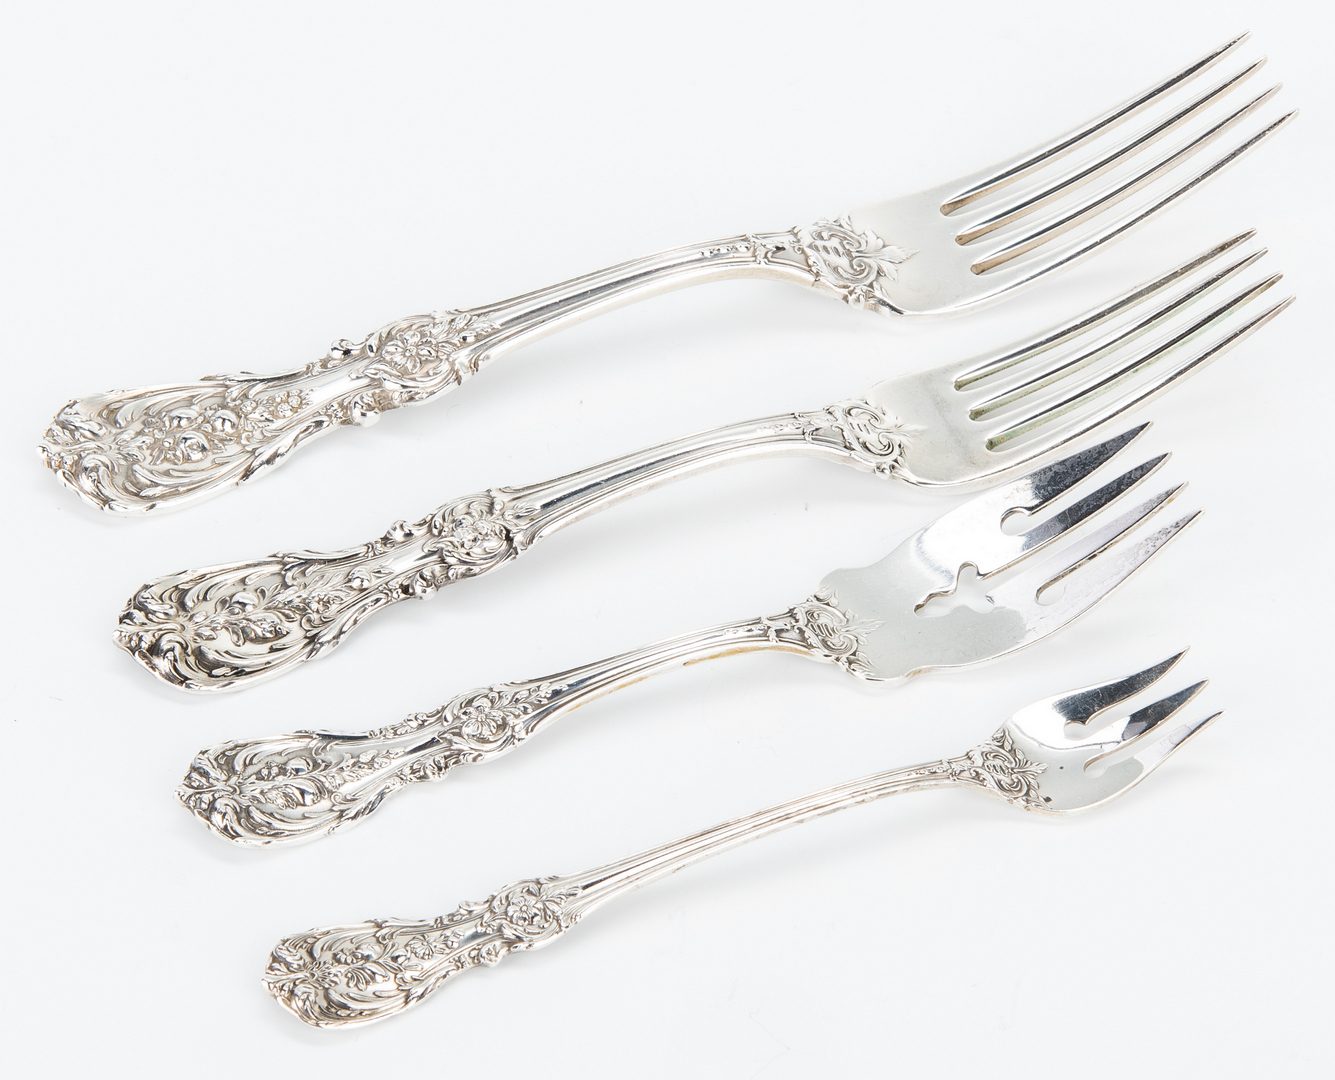 Lot 60: Reed & Barton Francis I Sterling Flatware, 90 pieces